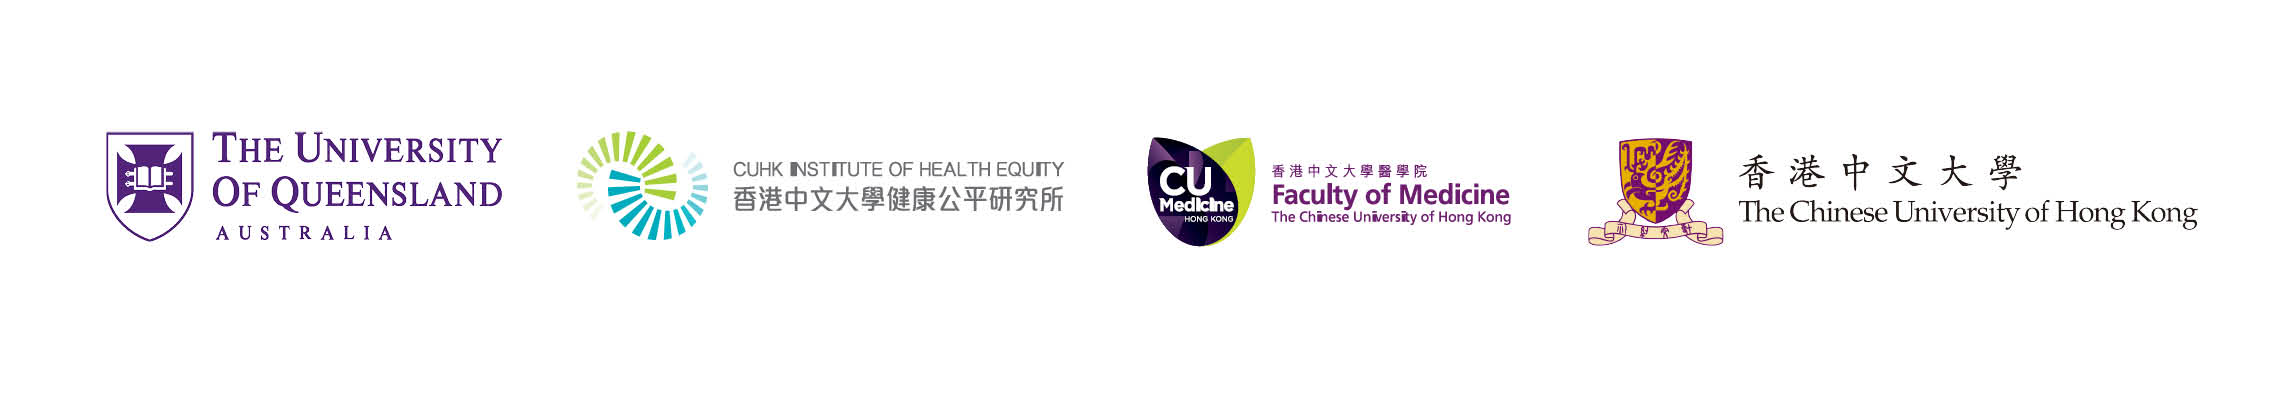 Logos of UK, the CUHK Institute of Health Equity, CUHK Faculty of Medicine and The Chinese University of Hong Kong.